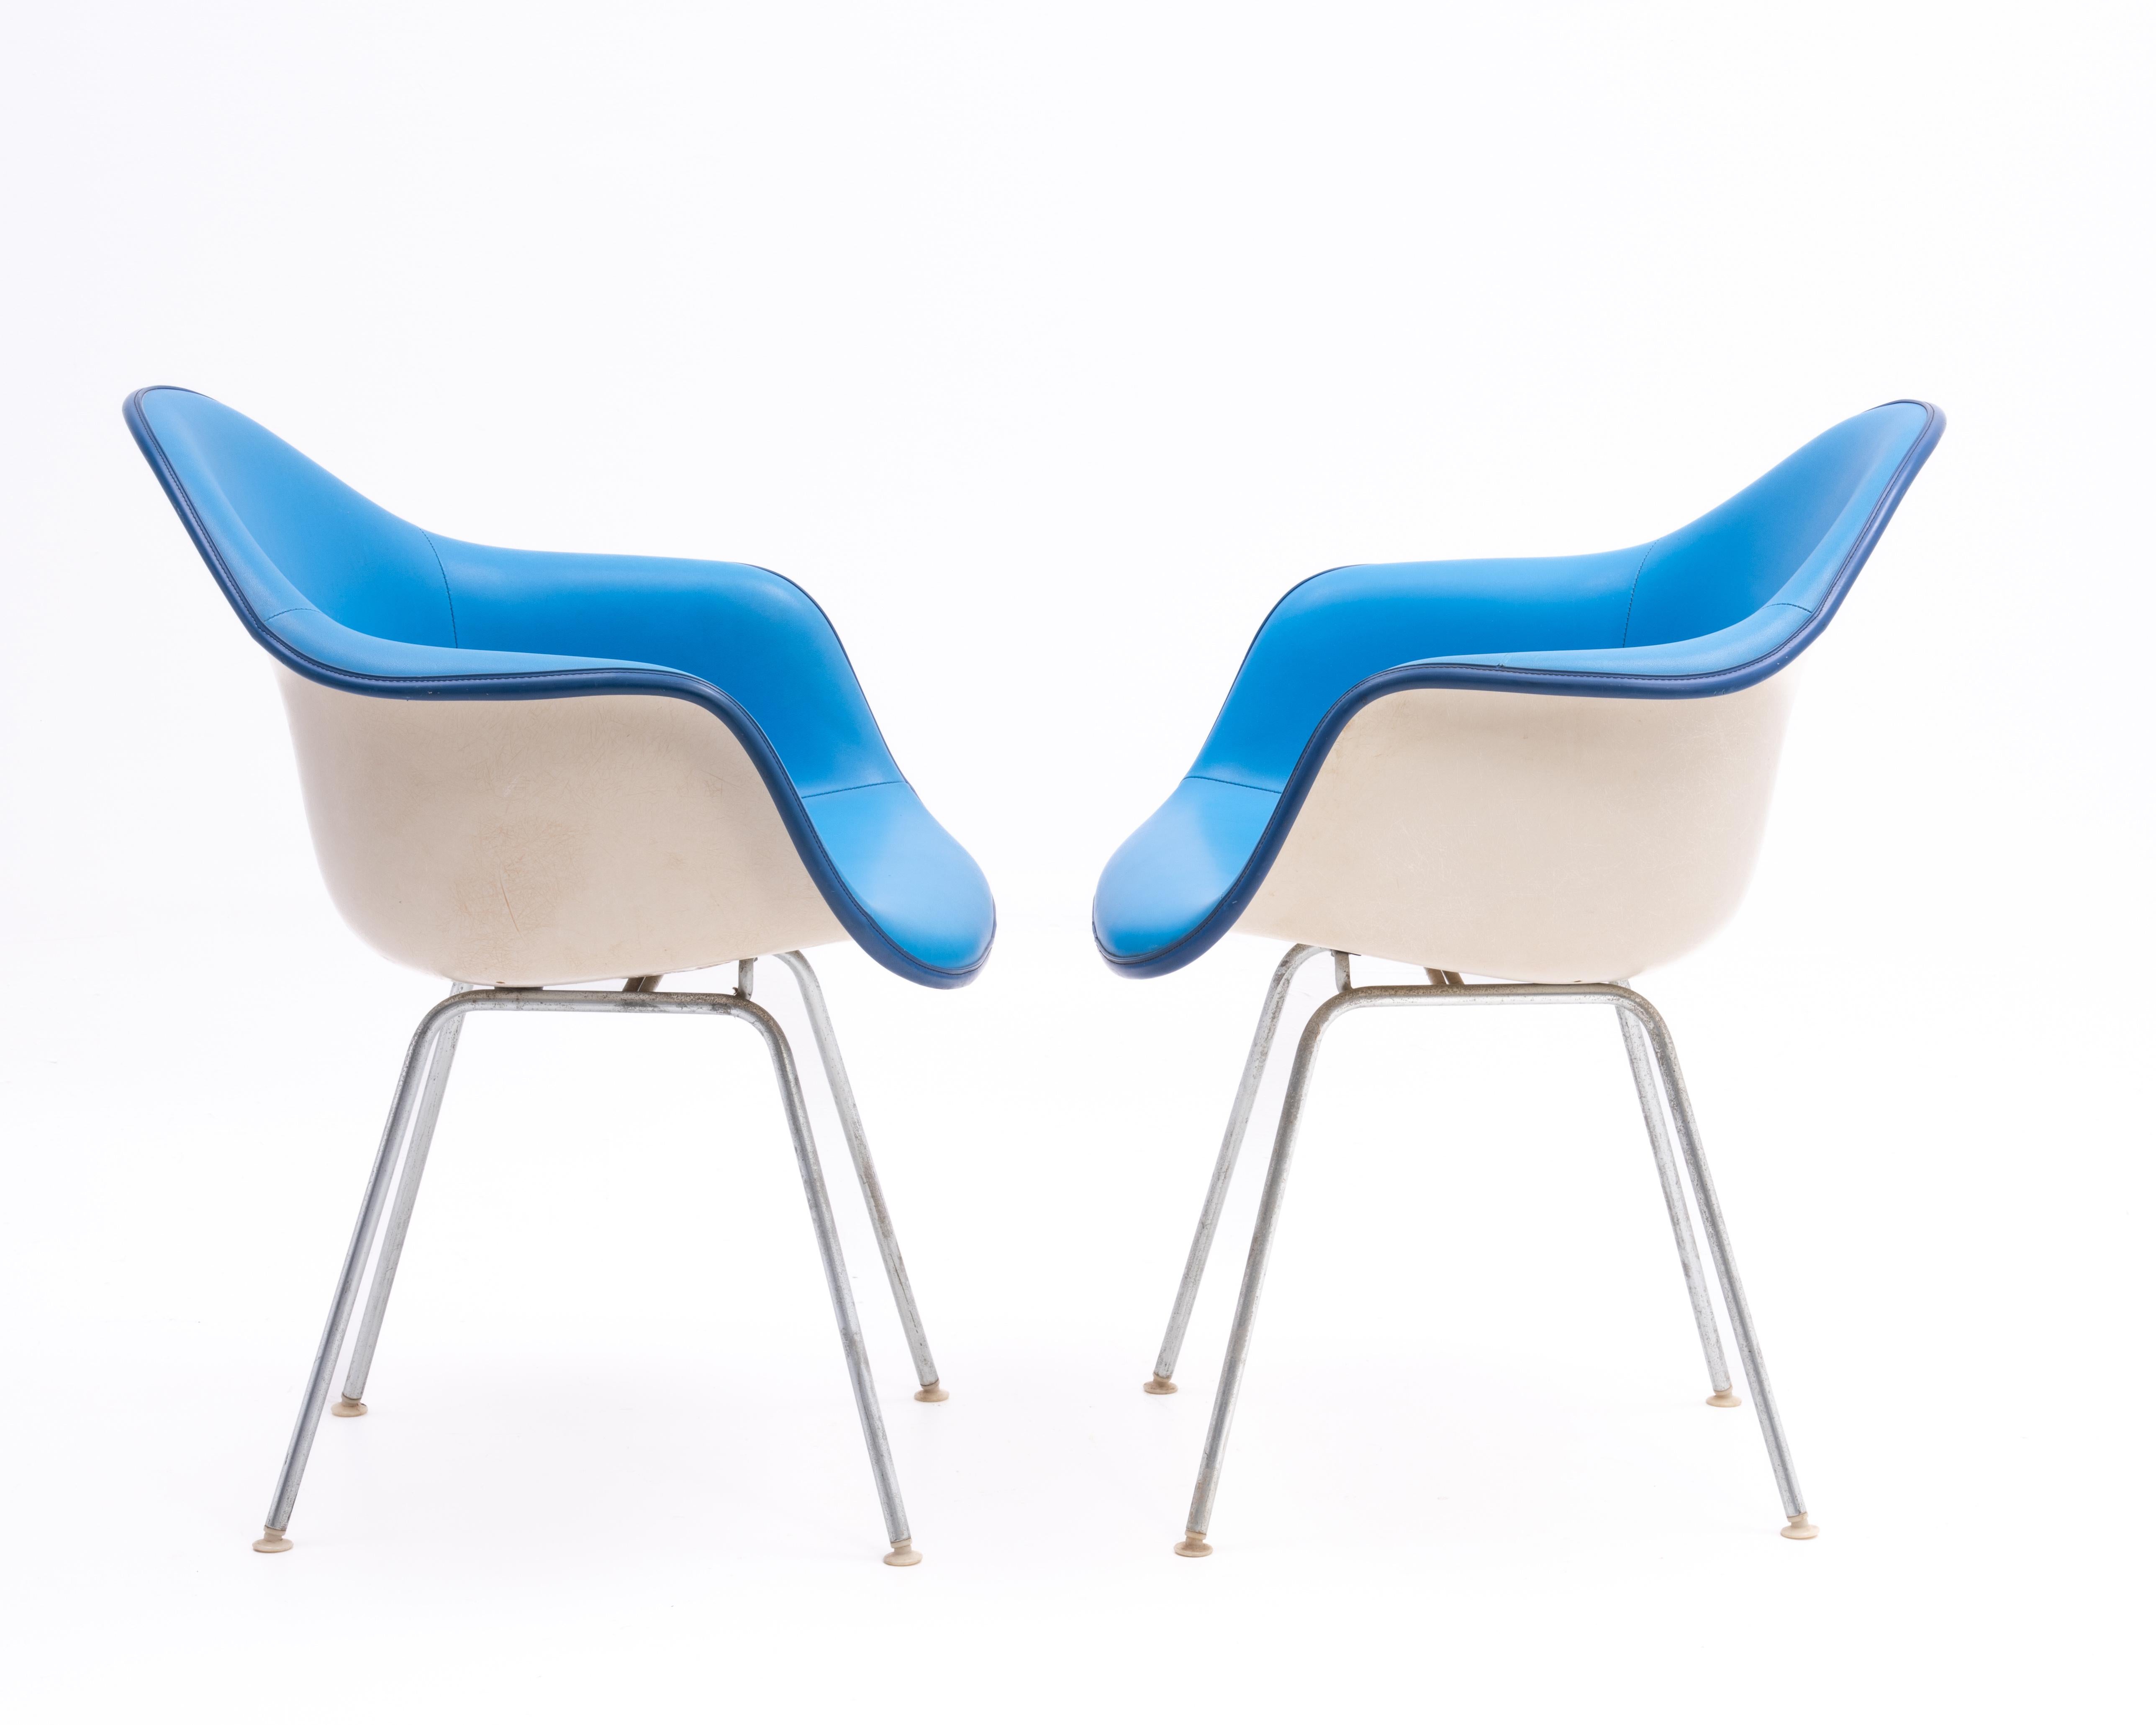 Ray Charles Eames Herman Miller Padded Arm Shell Chairs Alexander Girard a Pair For Sale 1